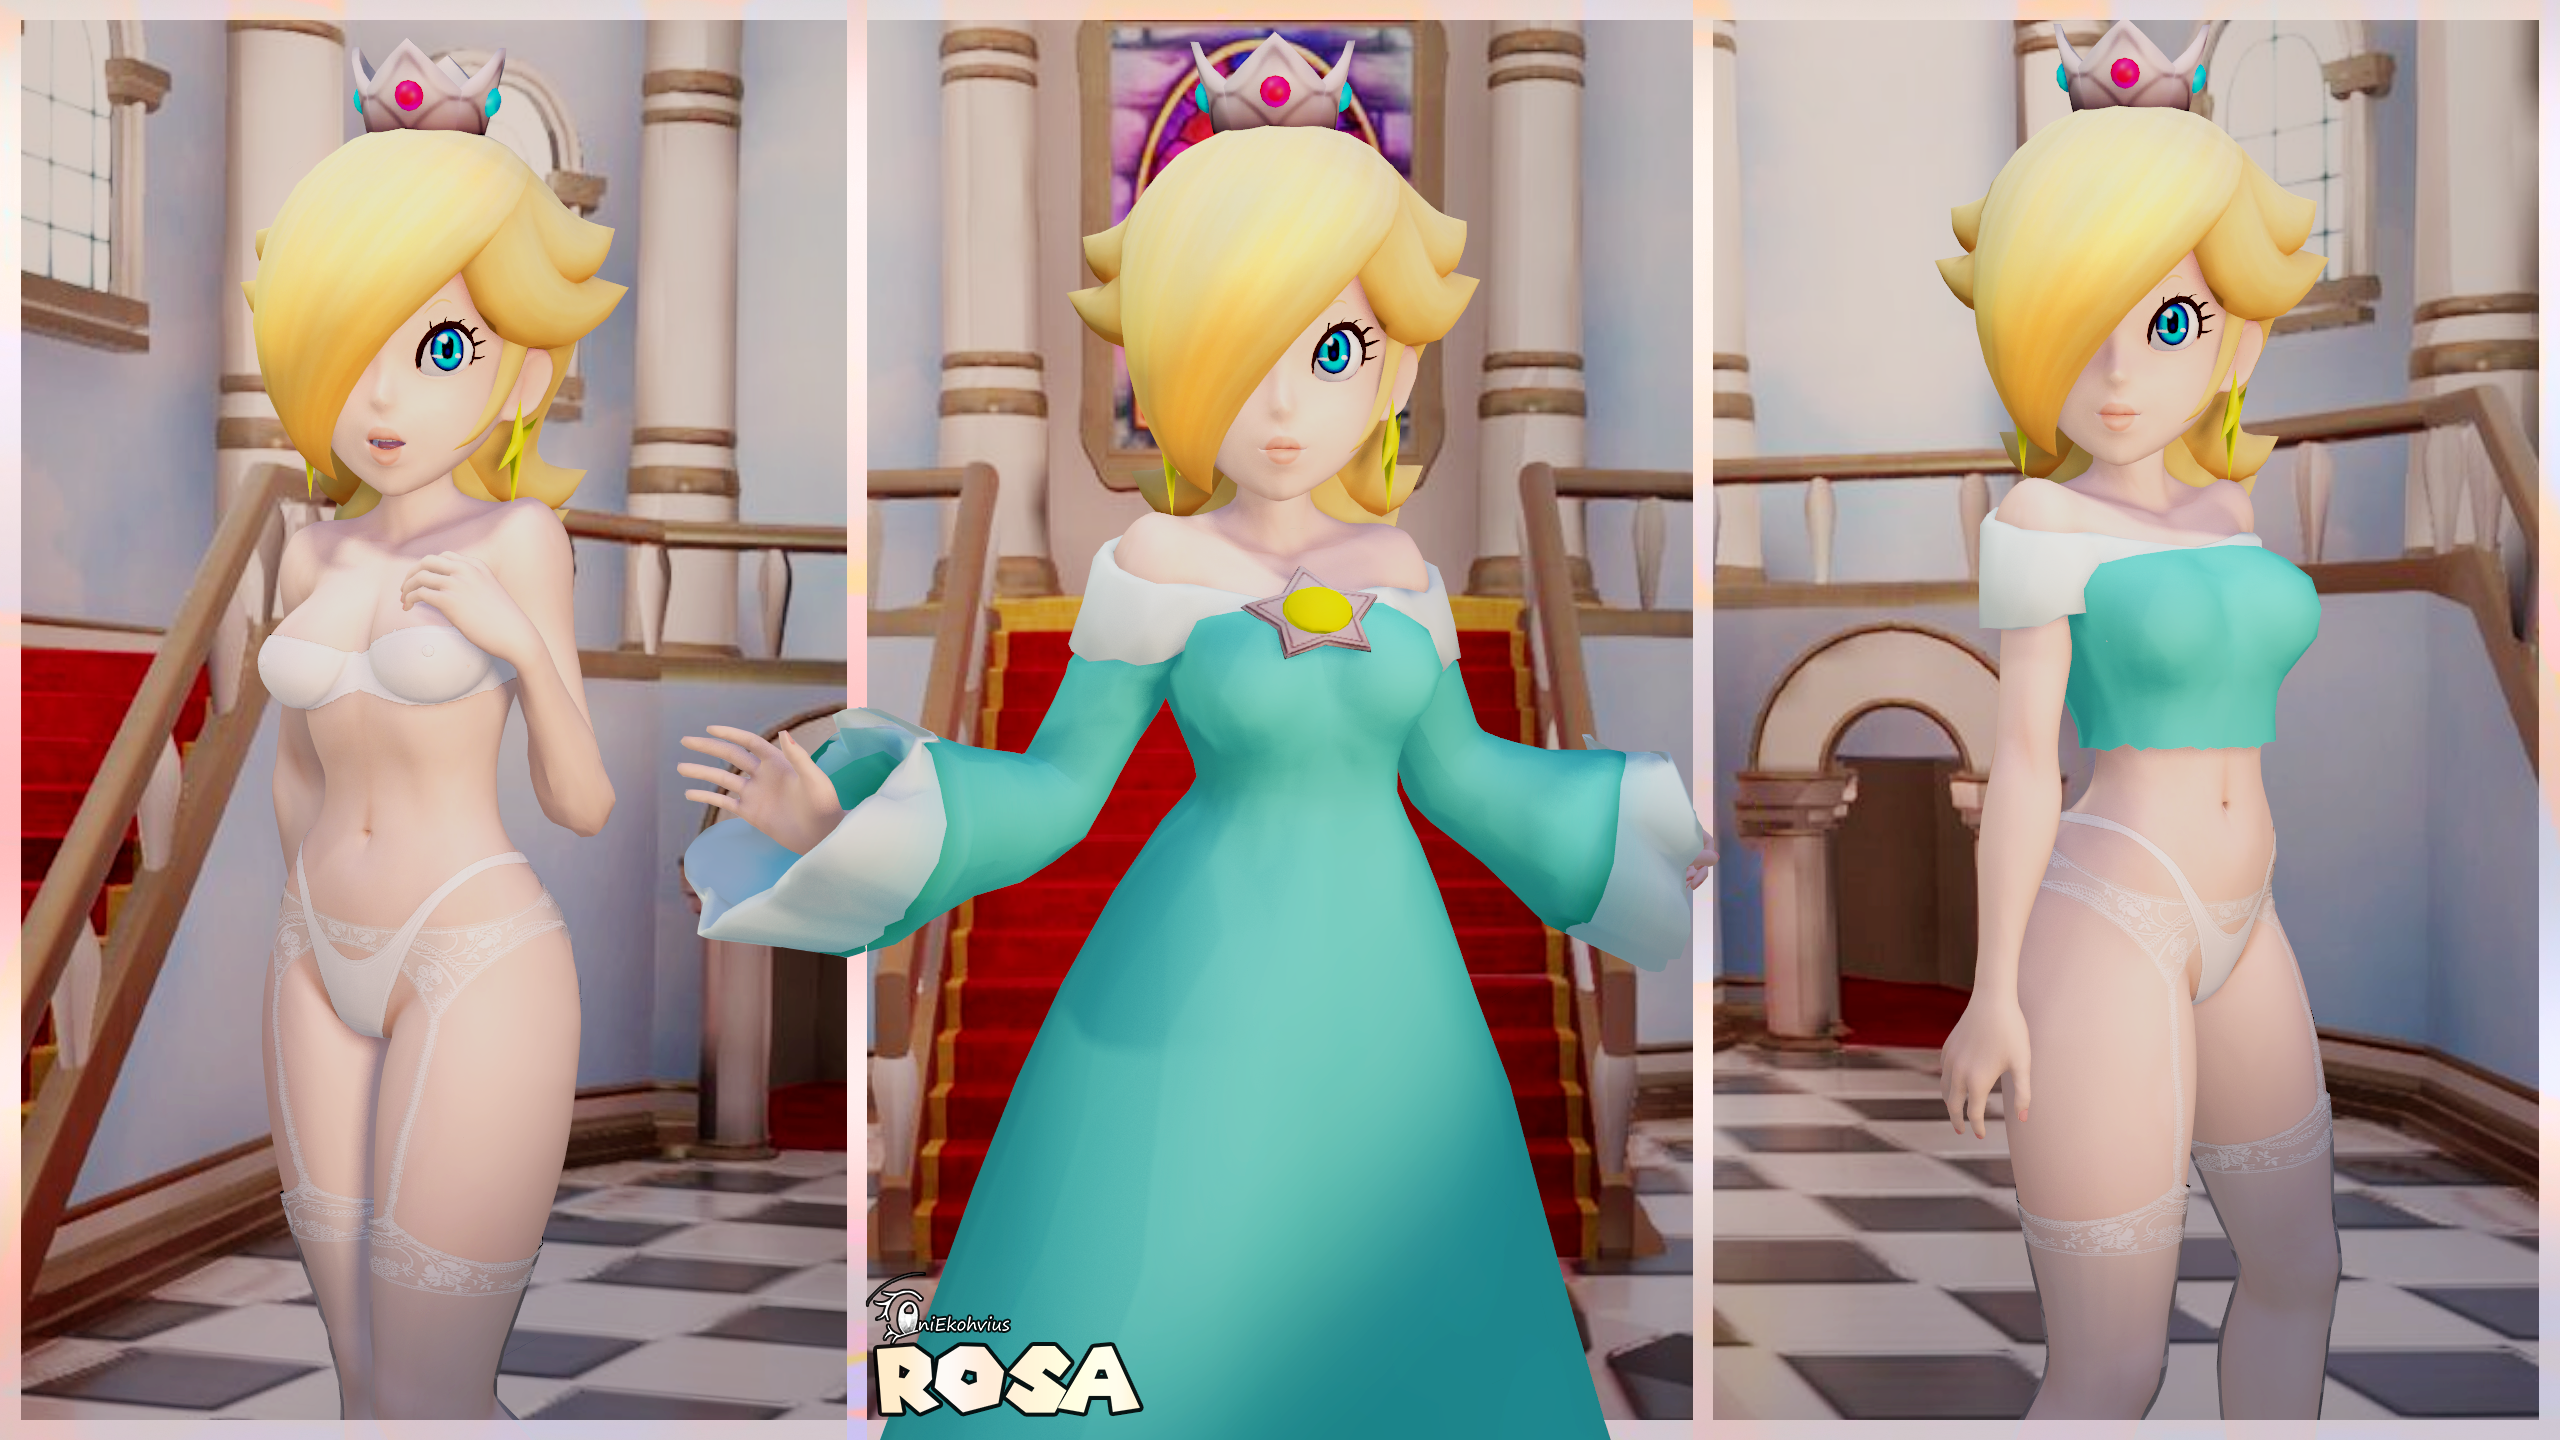 Collage - Rosalina A.png